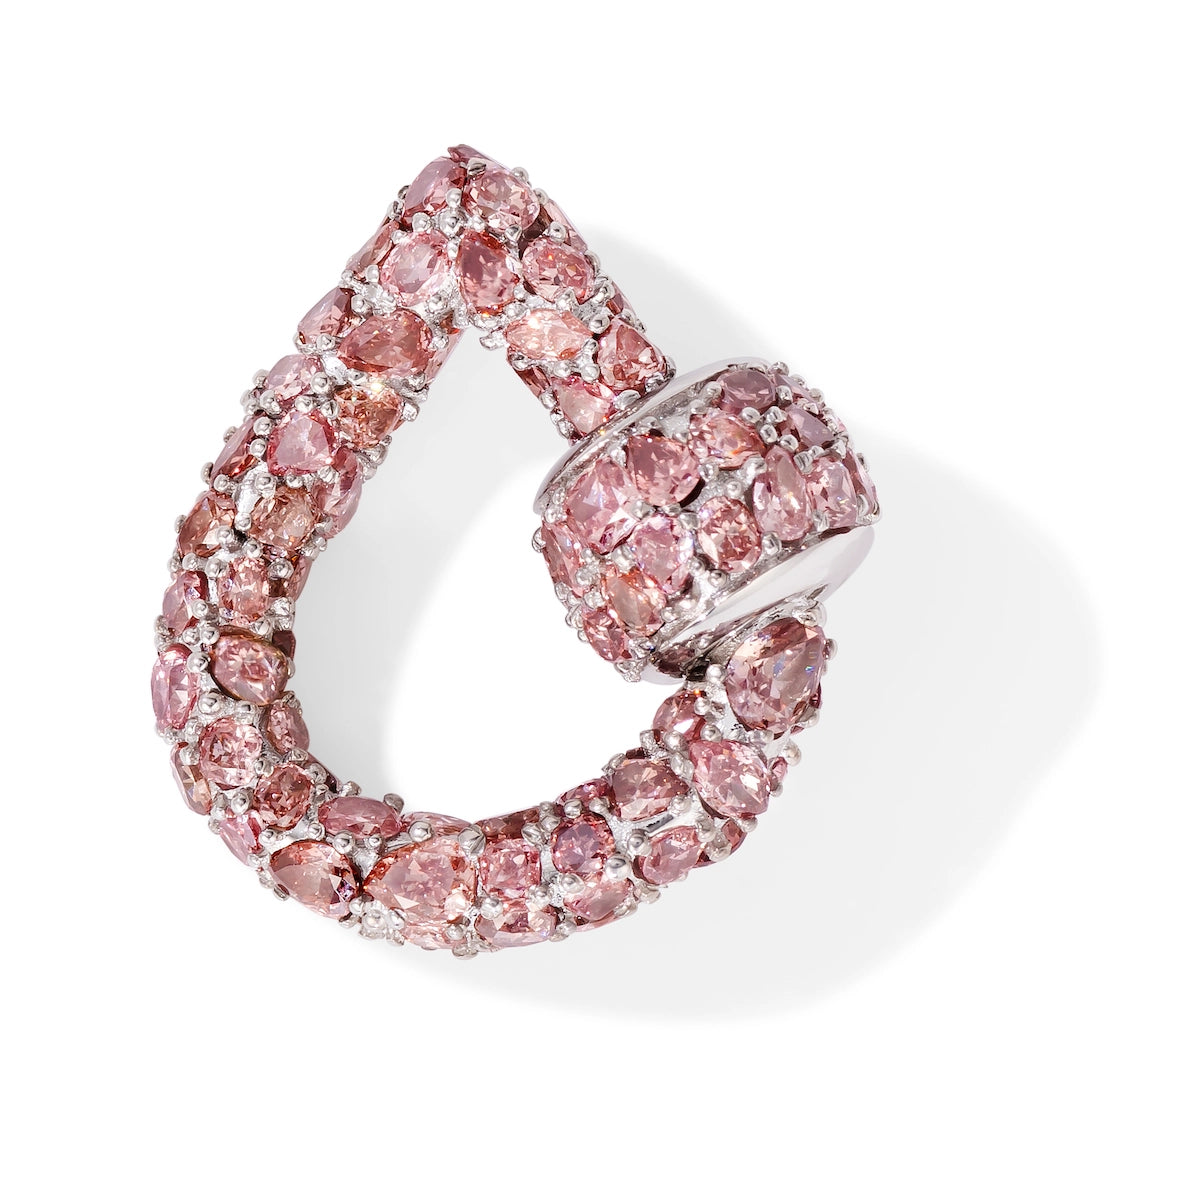 Marla Aaron Unveils One-of-a-Kind Piece with 10 Carats of Natural Pink Diamonds